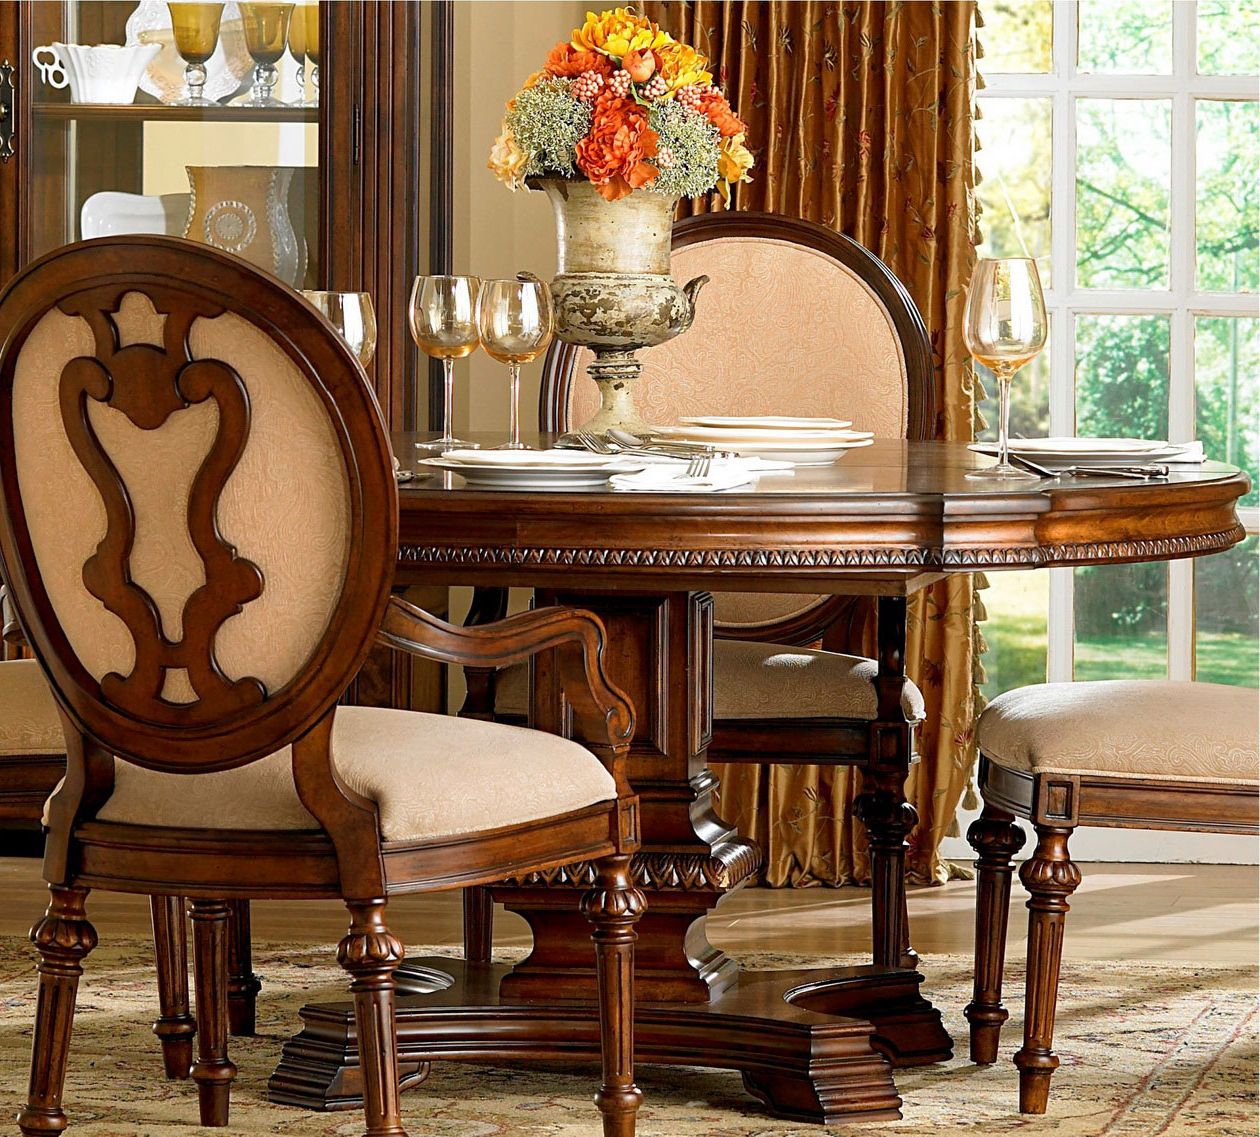 Latest Classic Dining Tables Throughout Lavish Classic Dining Table Designs As Attractive Focal (View 15 of 20)